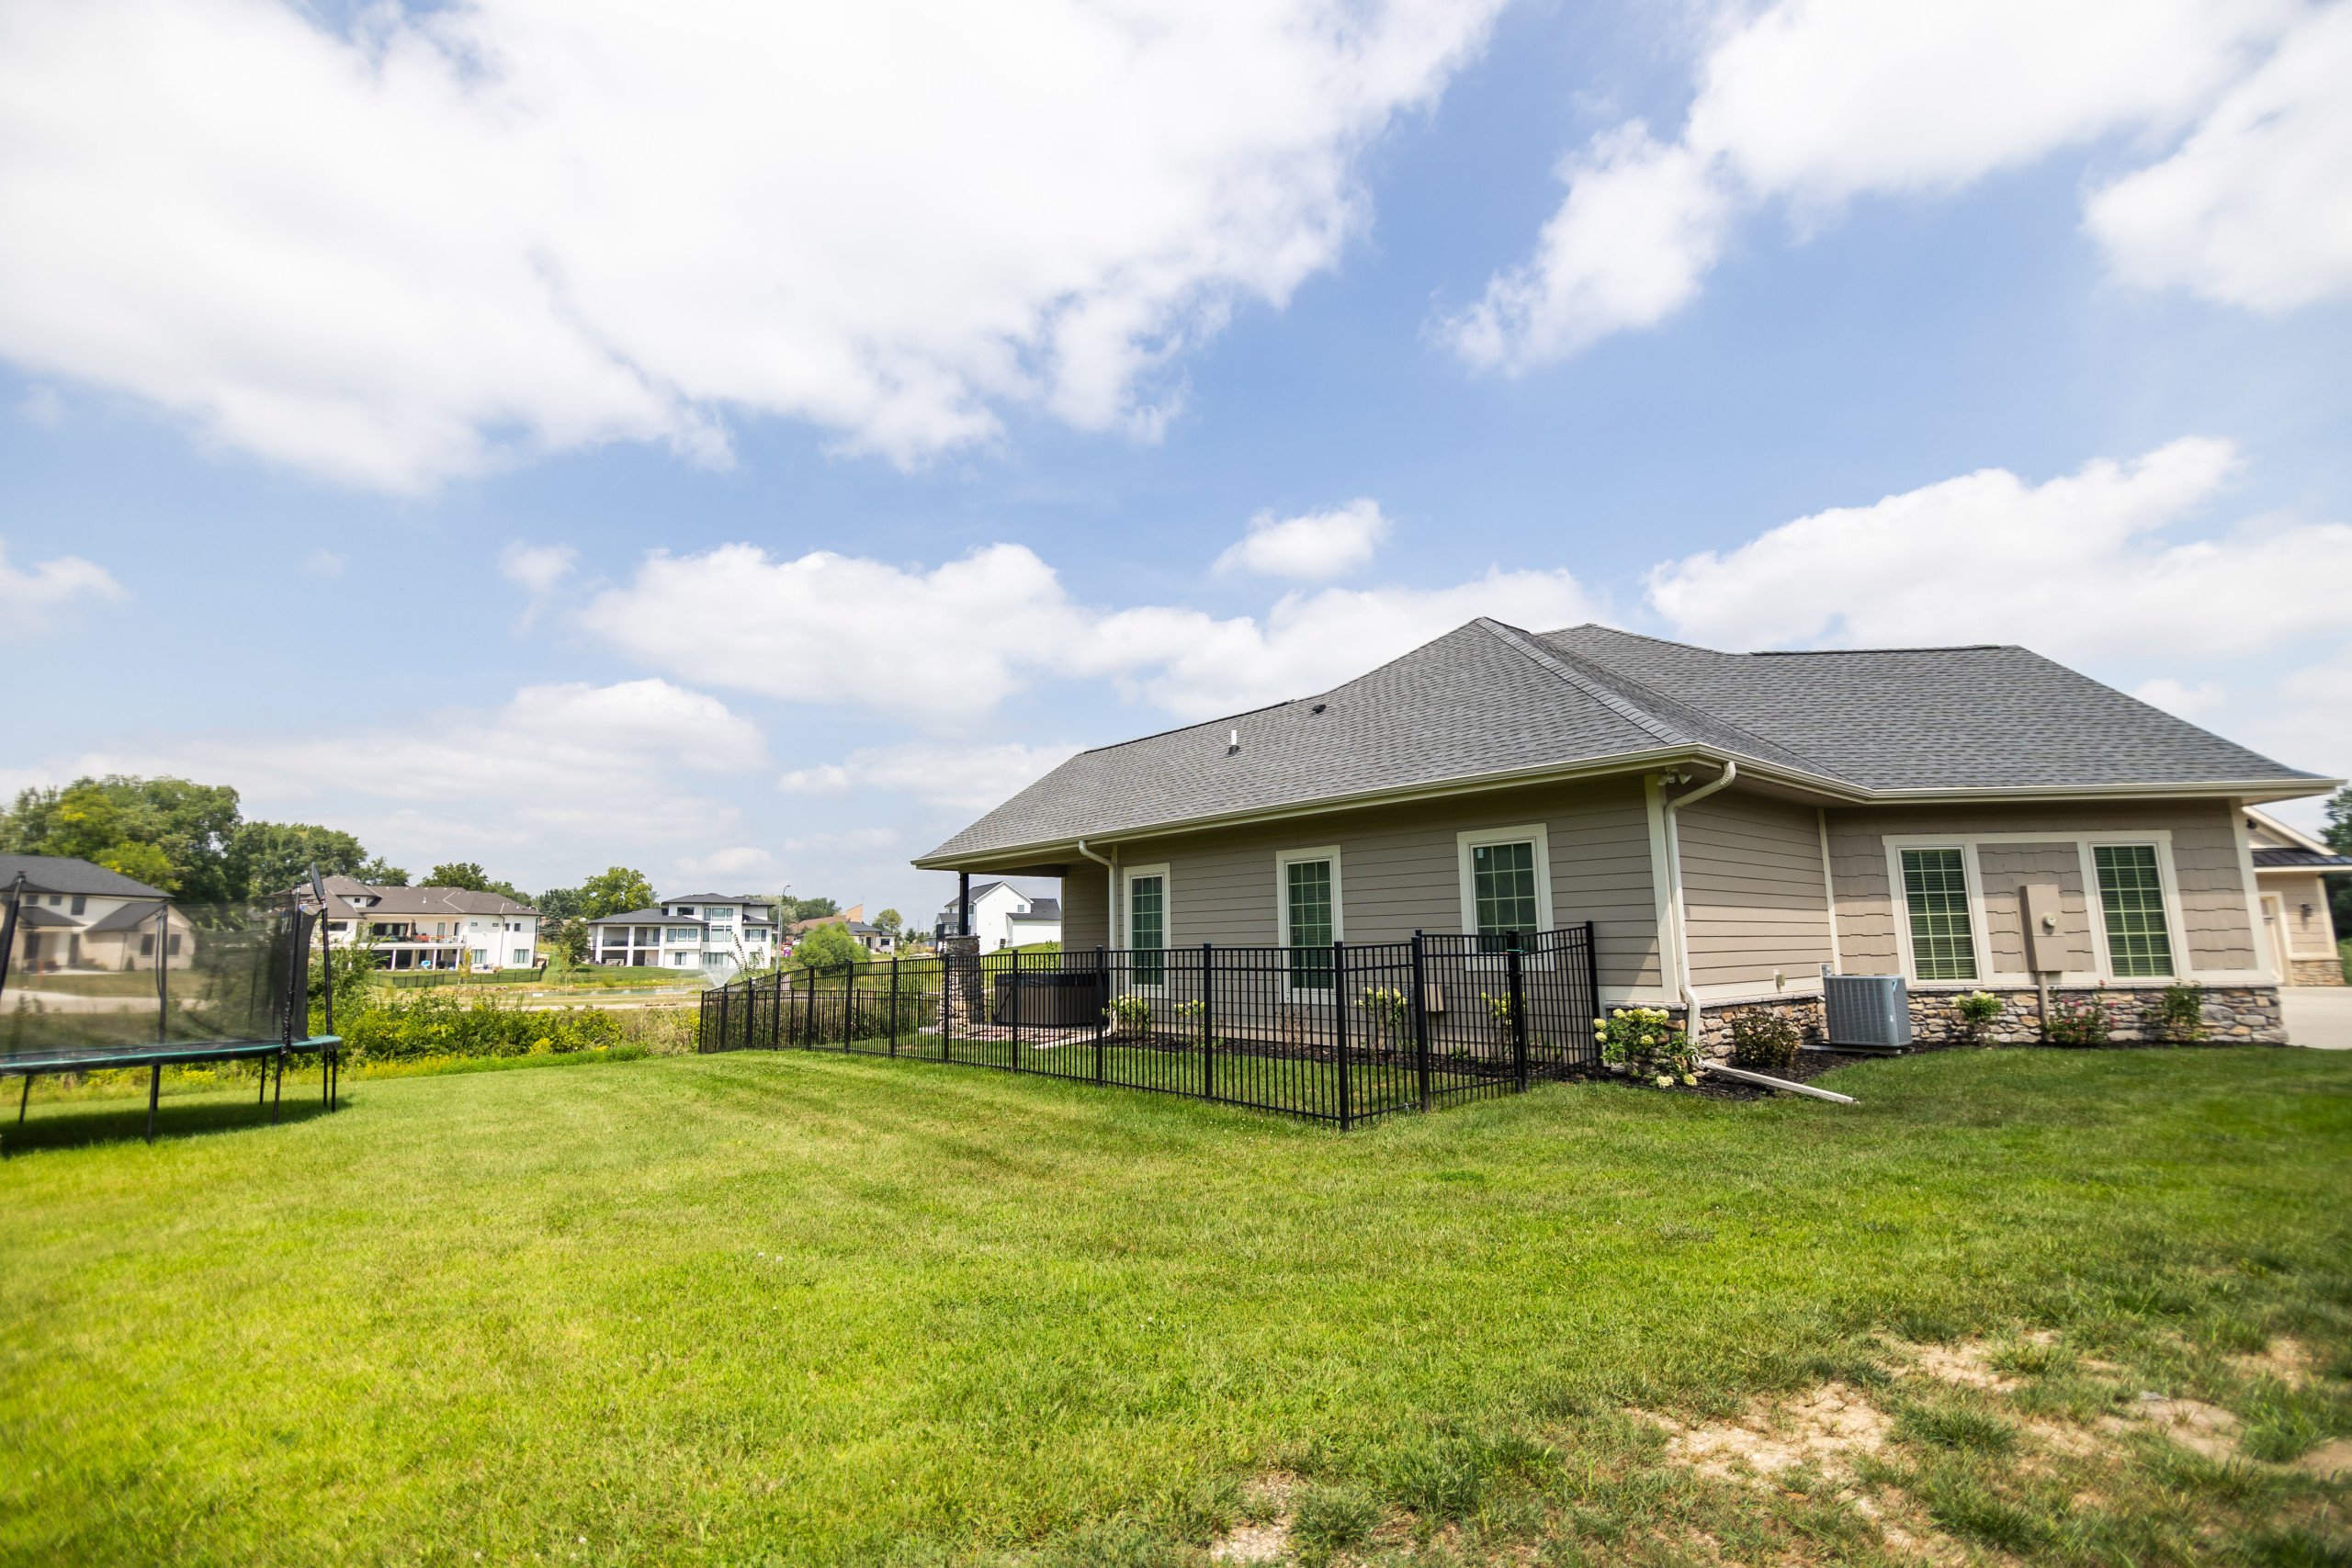 residential-dallas-county-iowa-2-acres-listing-number-17069-38-5.jpg